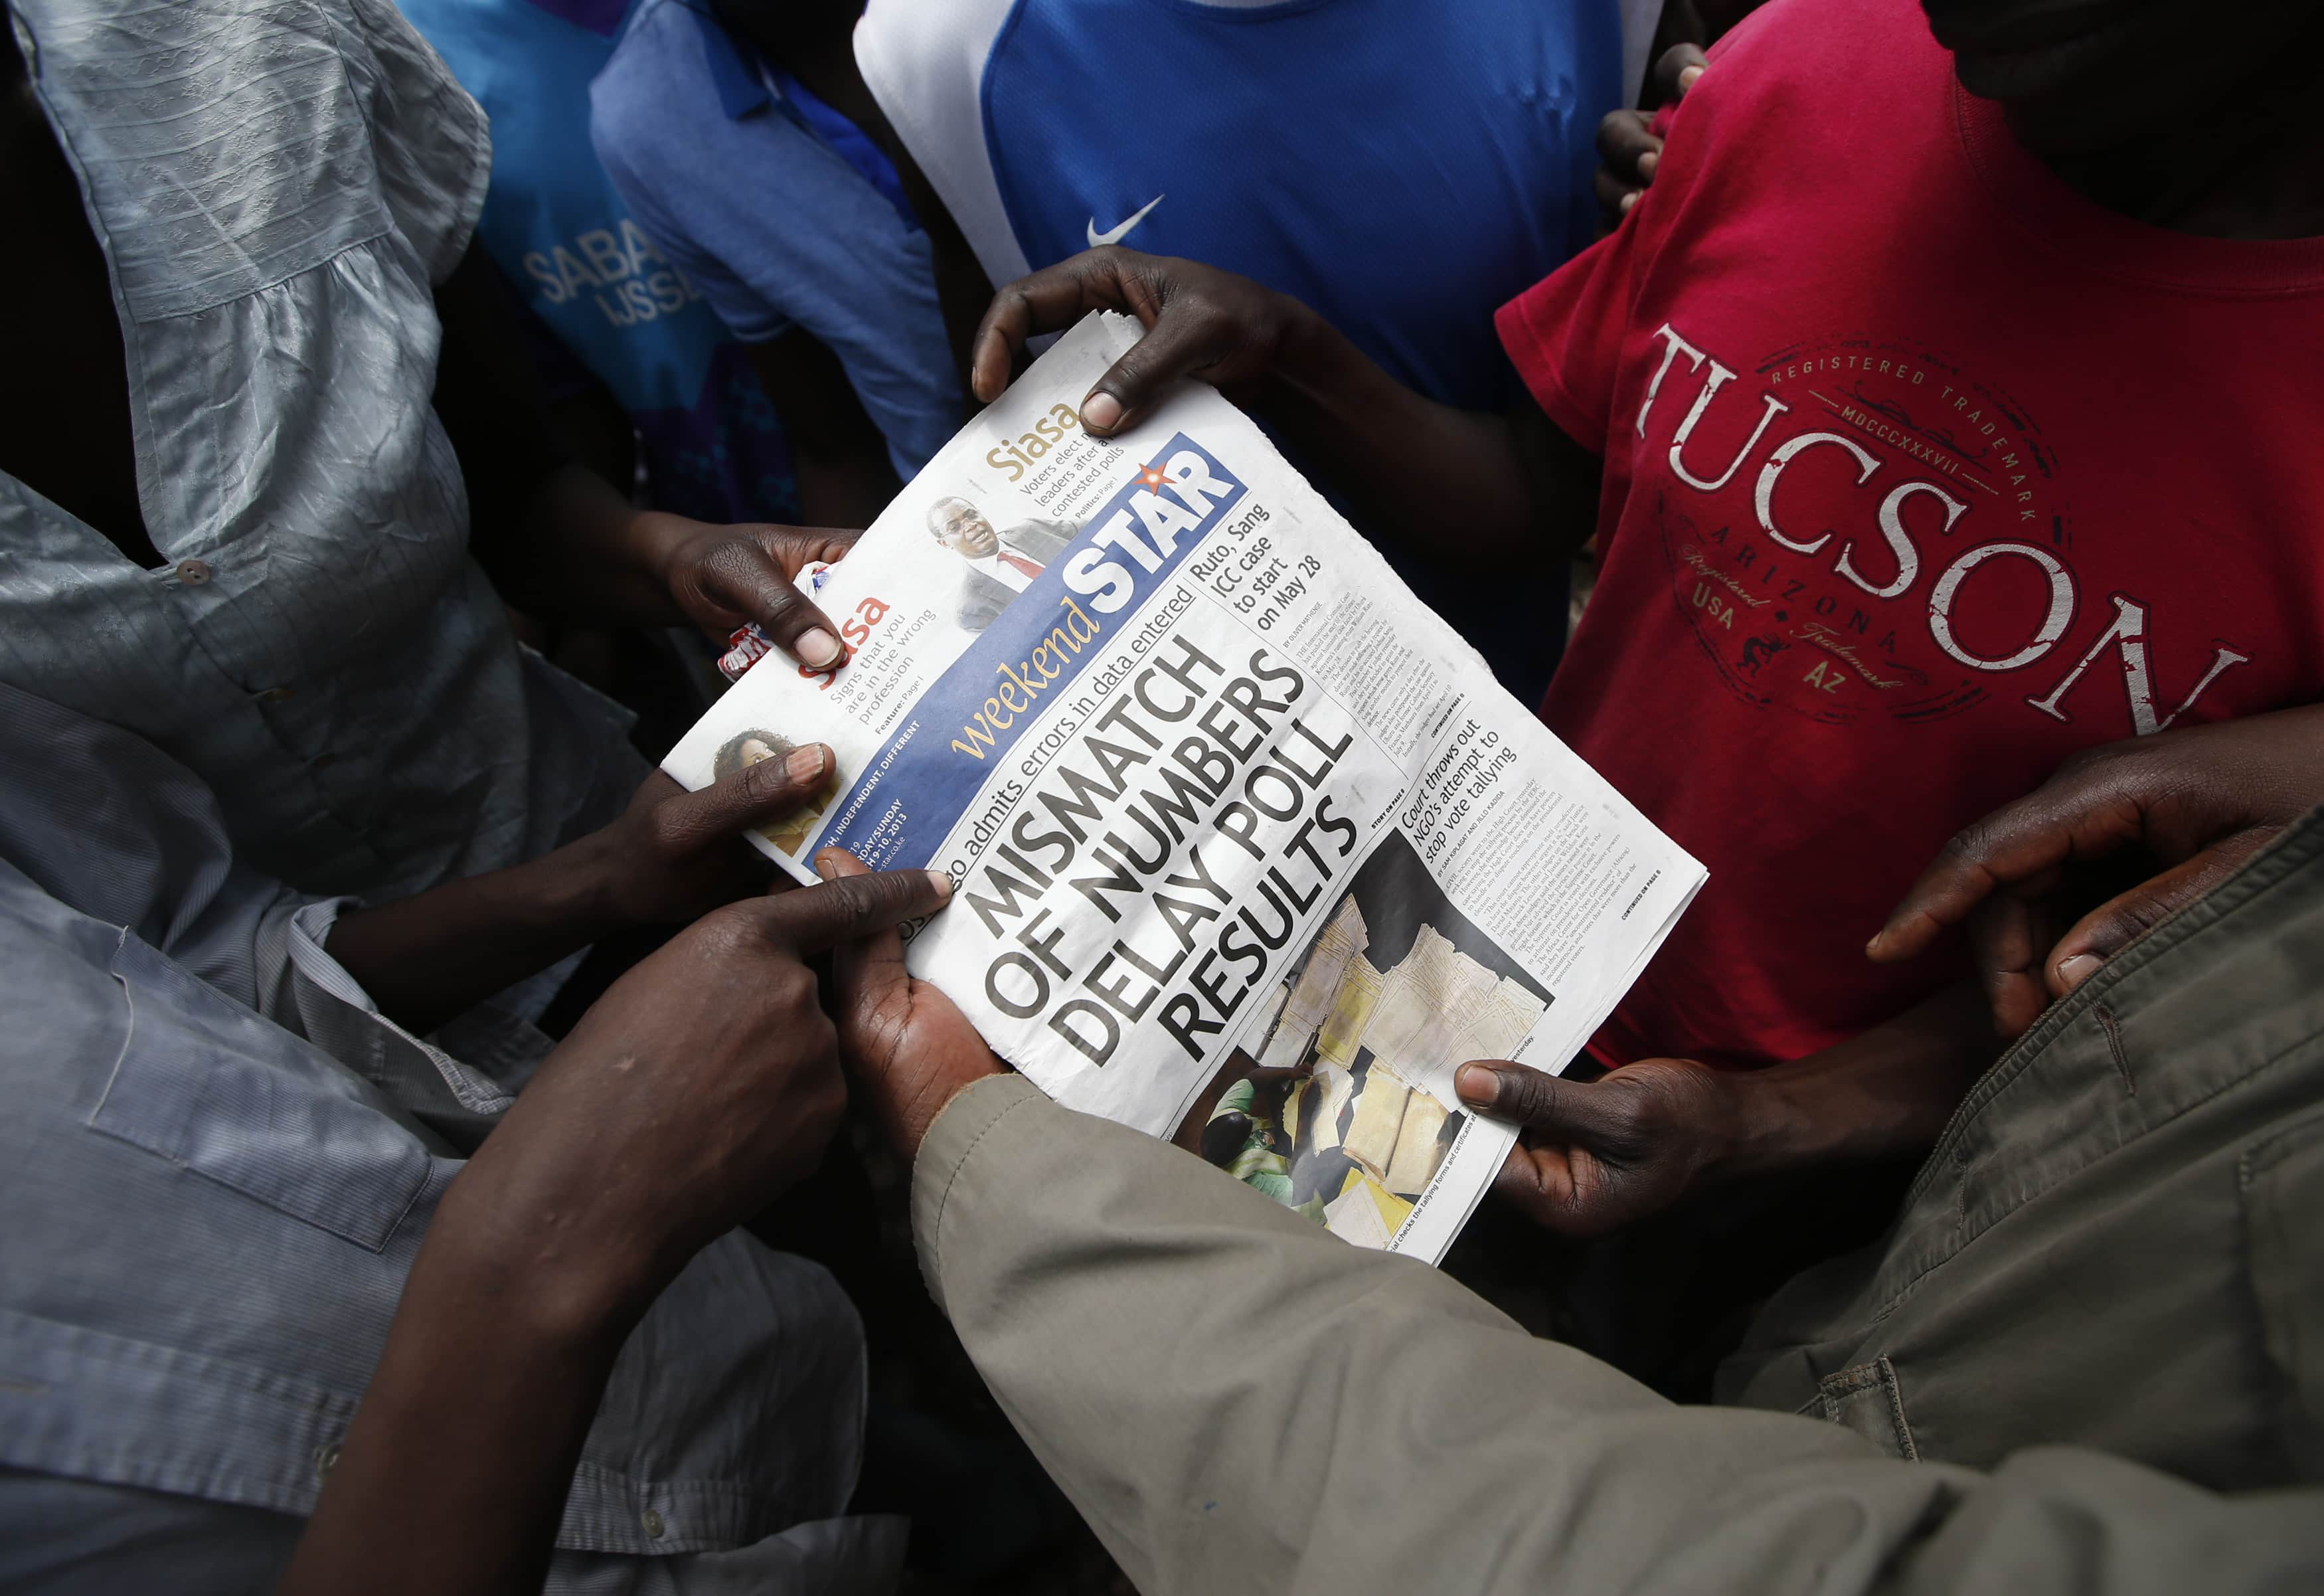 Supporters of Kenyan Prime Minister Raila Odinga look at a newspaper in the Mathare slum in Nairobi, 9 March 2013., REUTERS/Goran Tomasevic